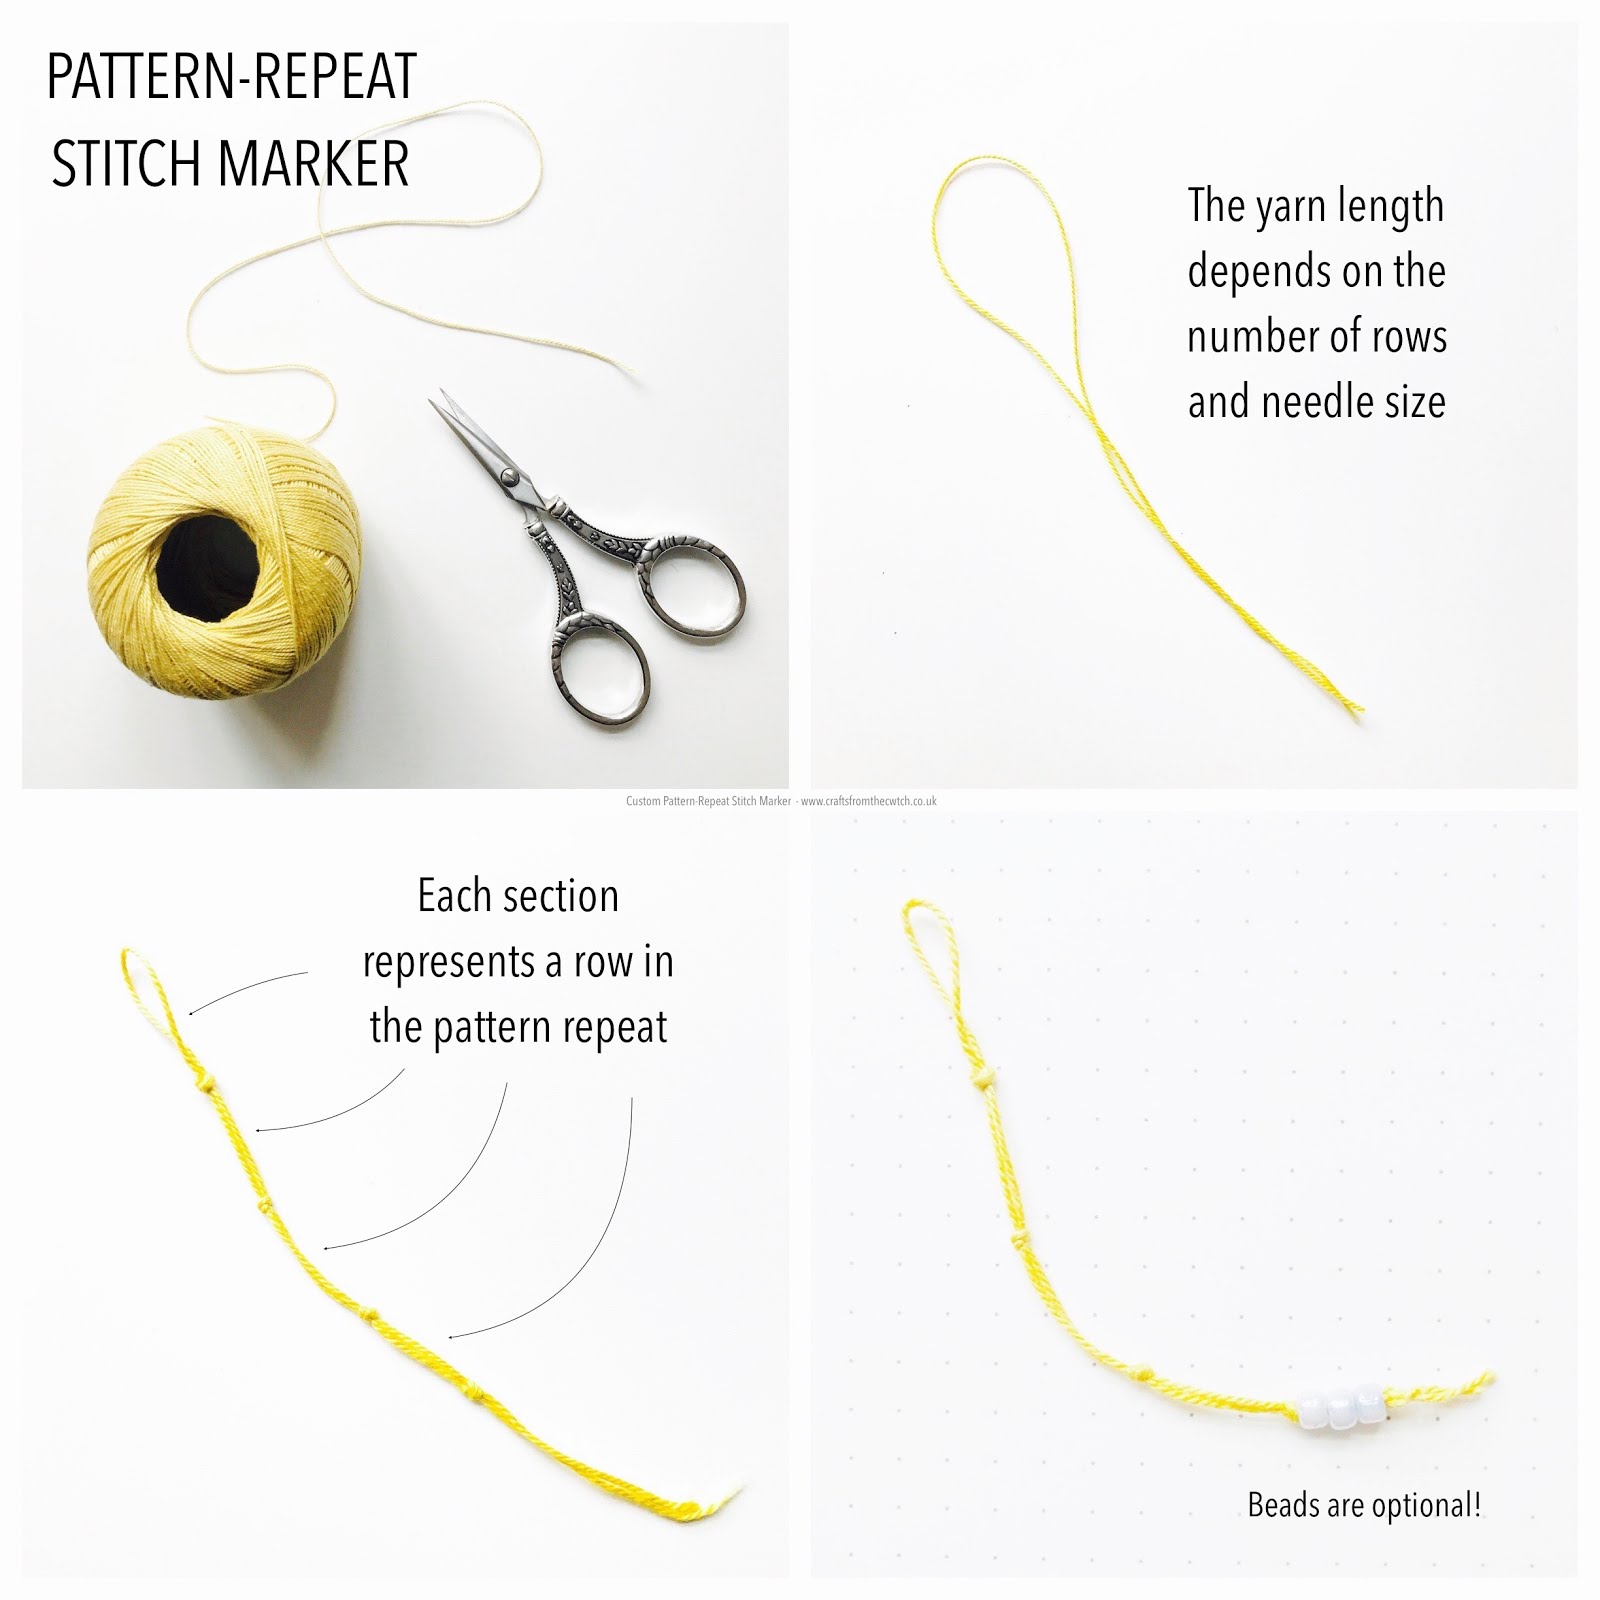 DIY Pattern-Repeat Stitch Marker | Crafts from the Cwtch